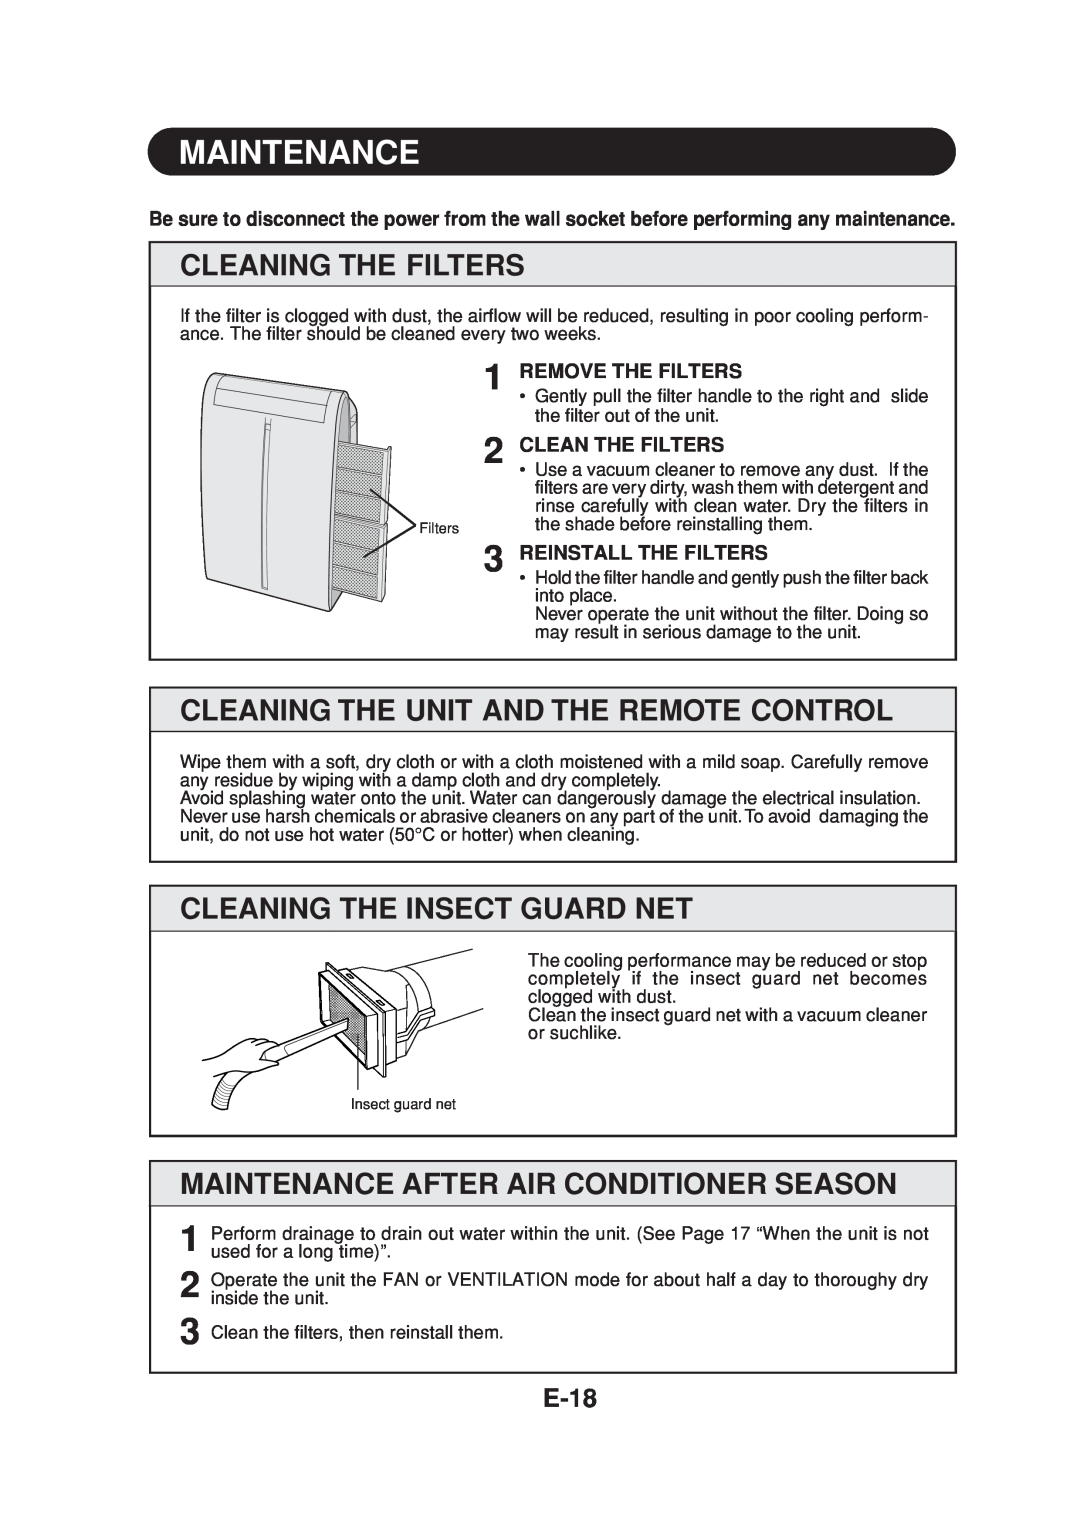 Sharp CV-P09FR Maintenance, Cleaning The Filters, Cleaning The Unit And The Remote Control, Cleaning The Insect Guard Net 